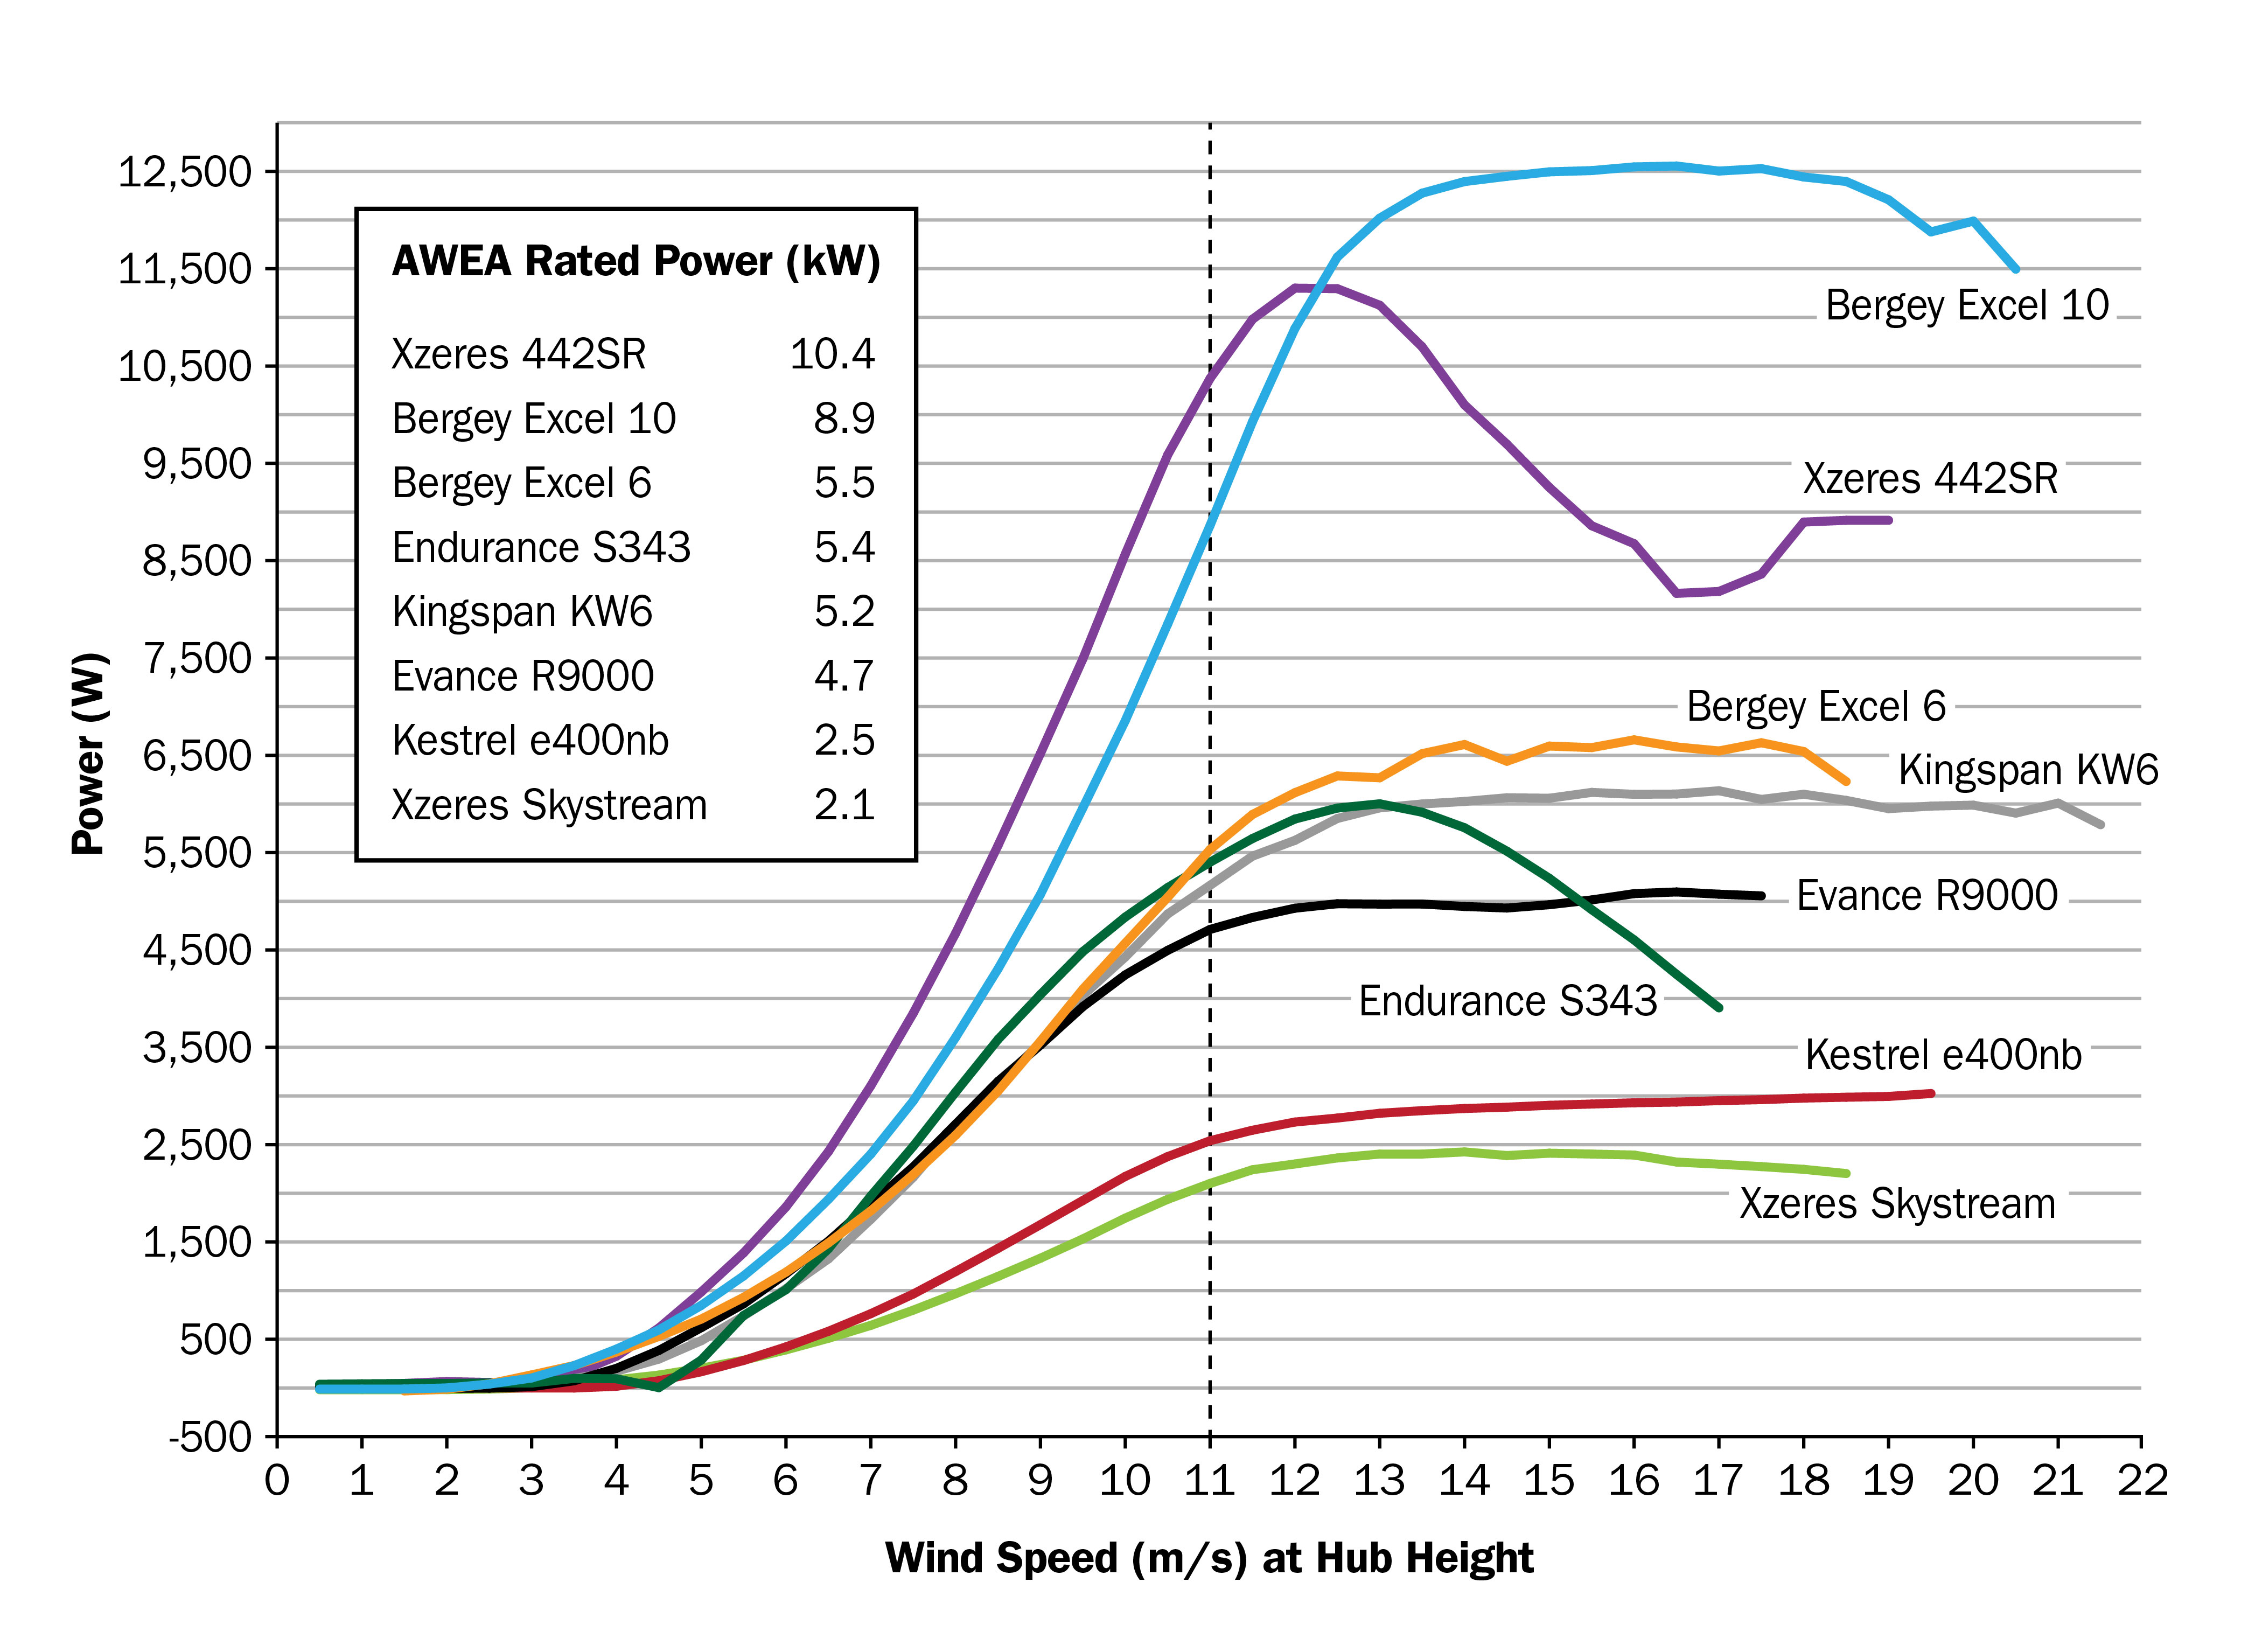 Typical wind turbine power curve : the turbine begins to operate at the